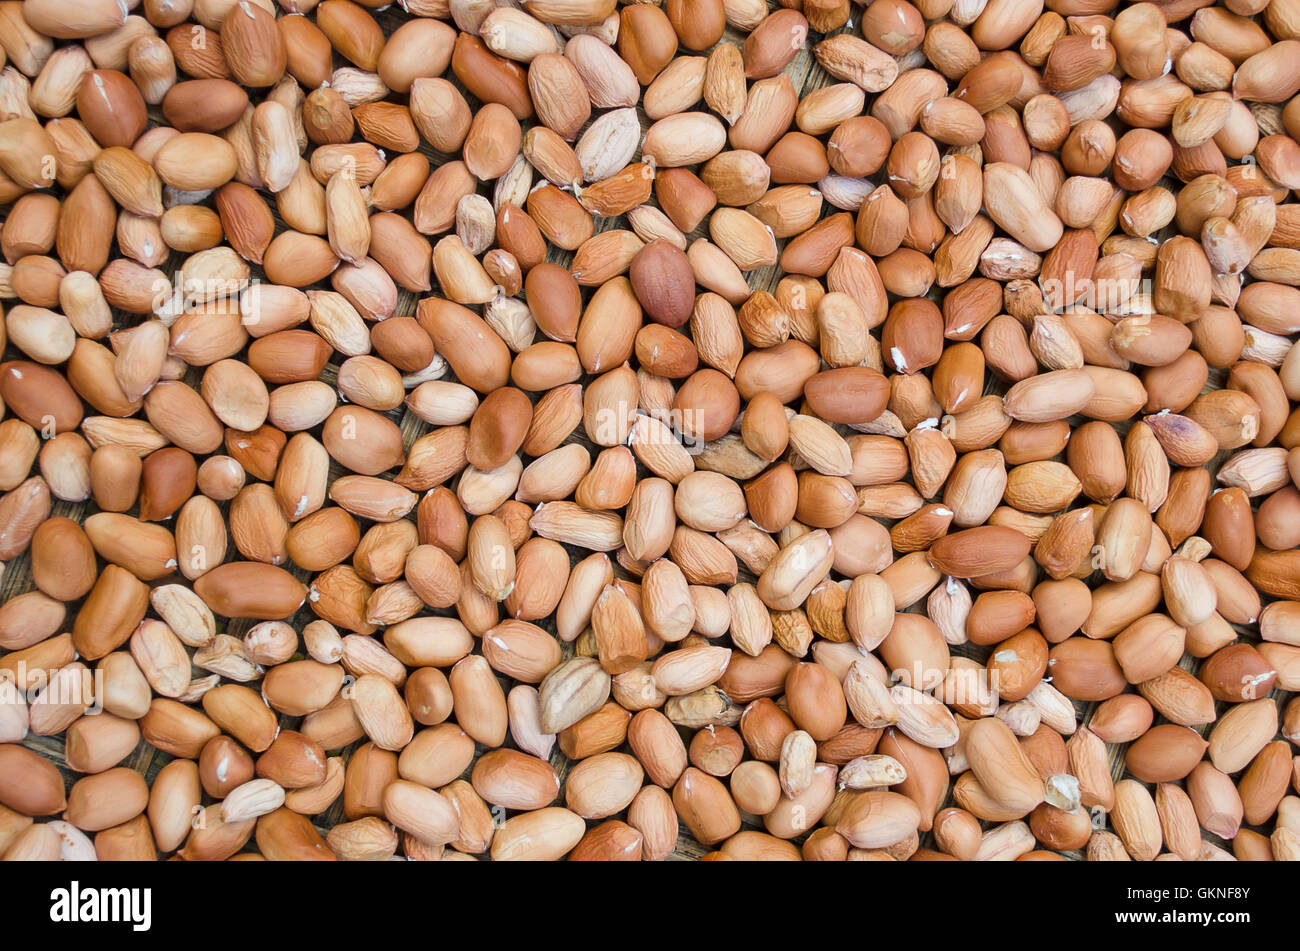 Peanuts, for backgrounds or textures Stock Photo